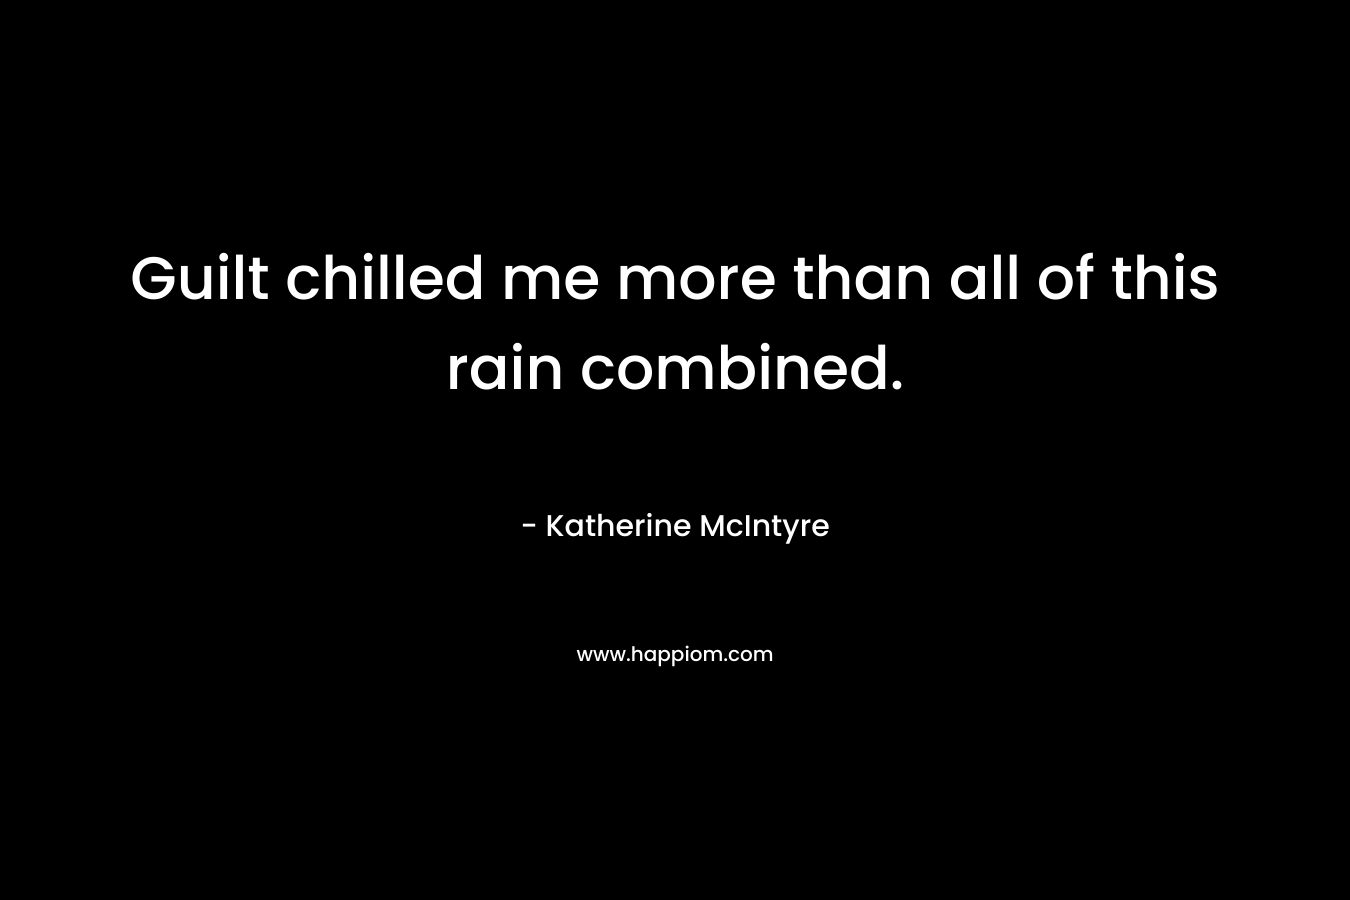 Guilt chilled me more than all of this rain combined. – Katherine McIntyre